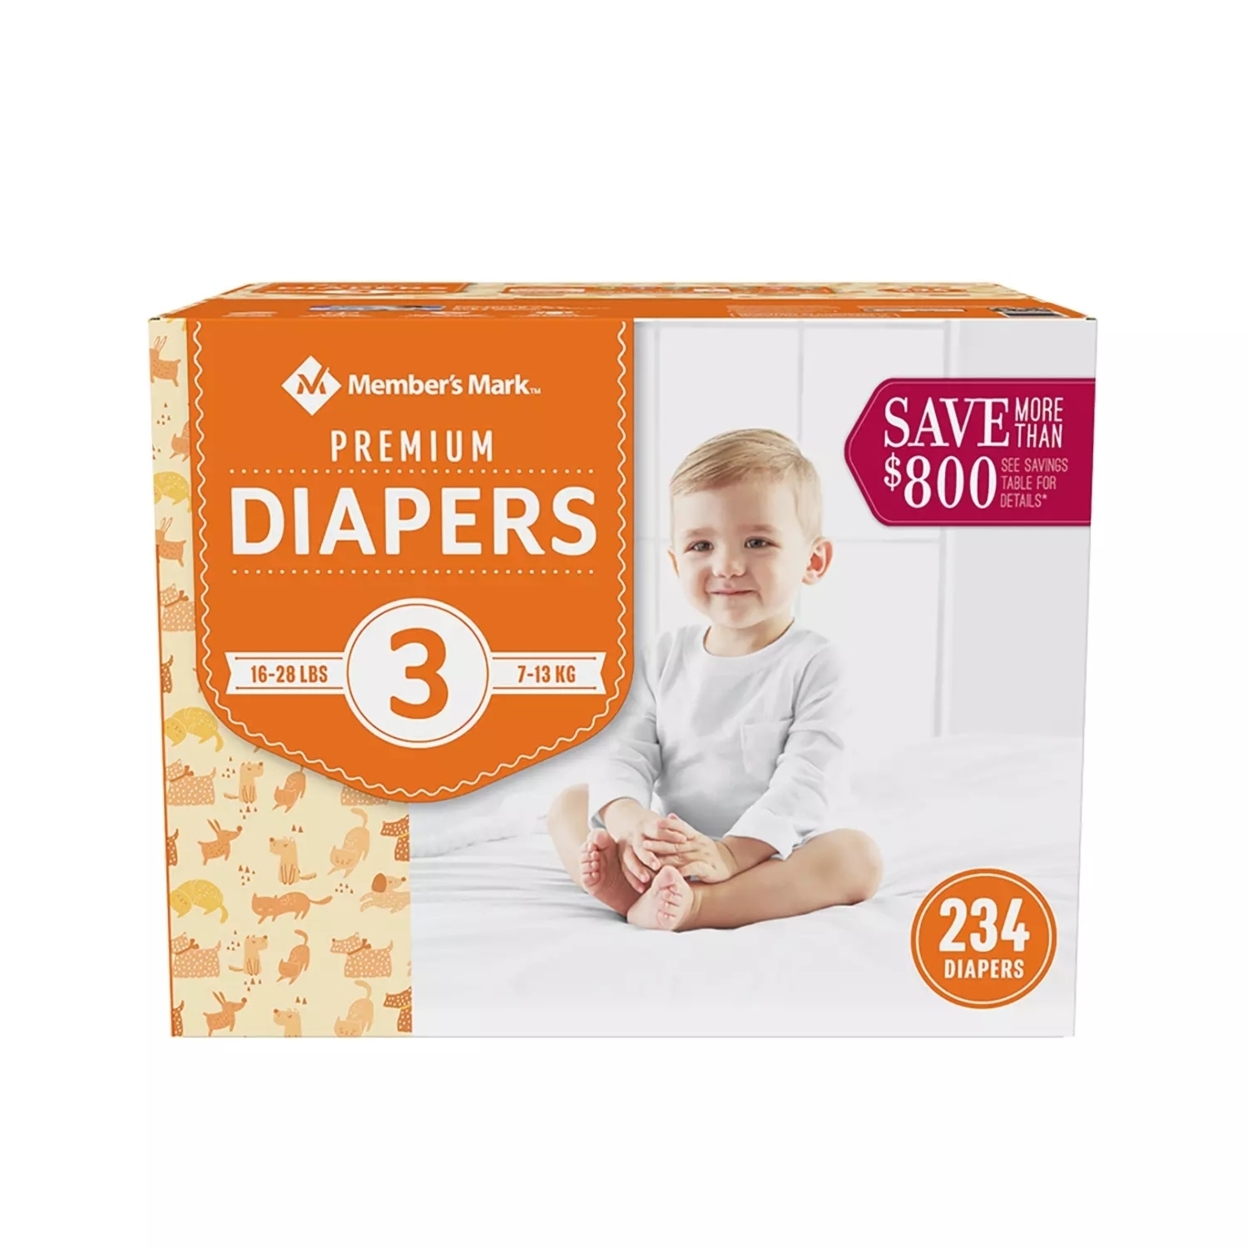 Member's Mark Premium Baby Diapers Size 3 (16-28 Pounds), 234 Count